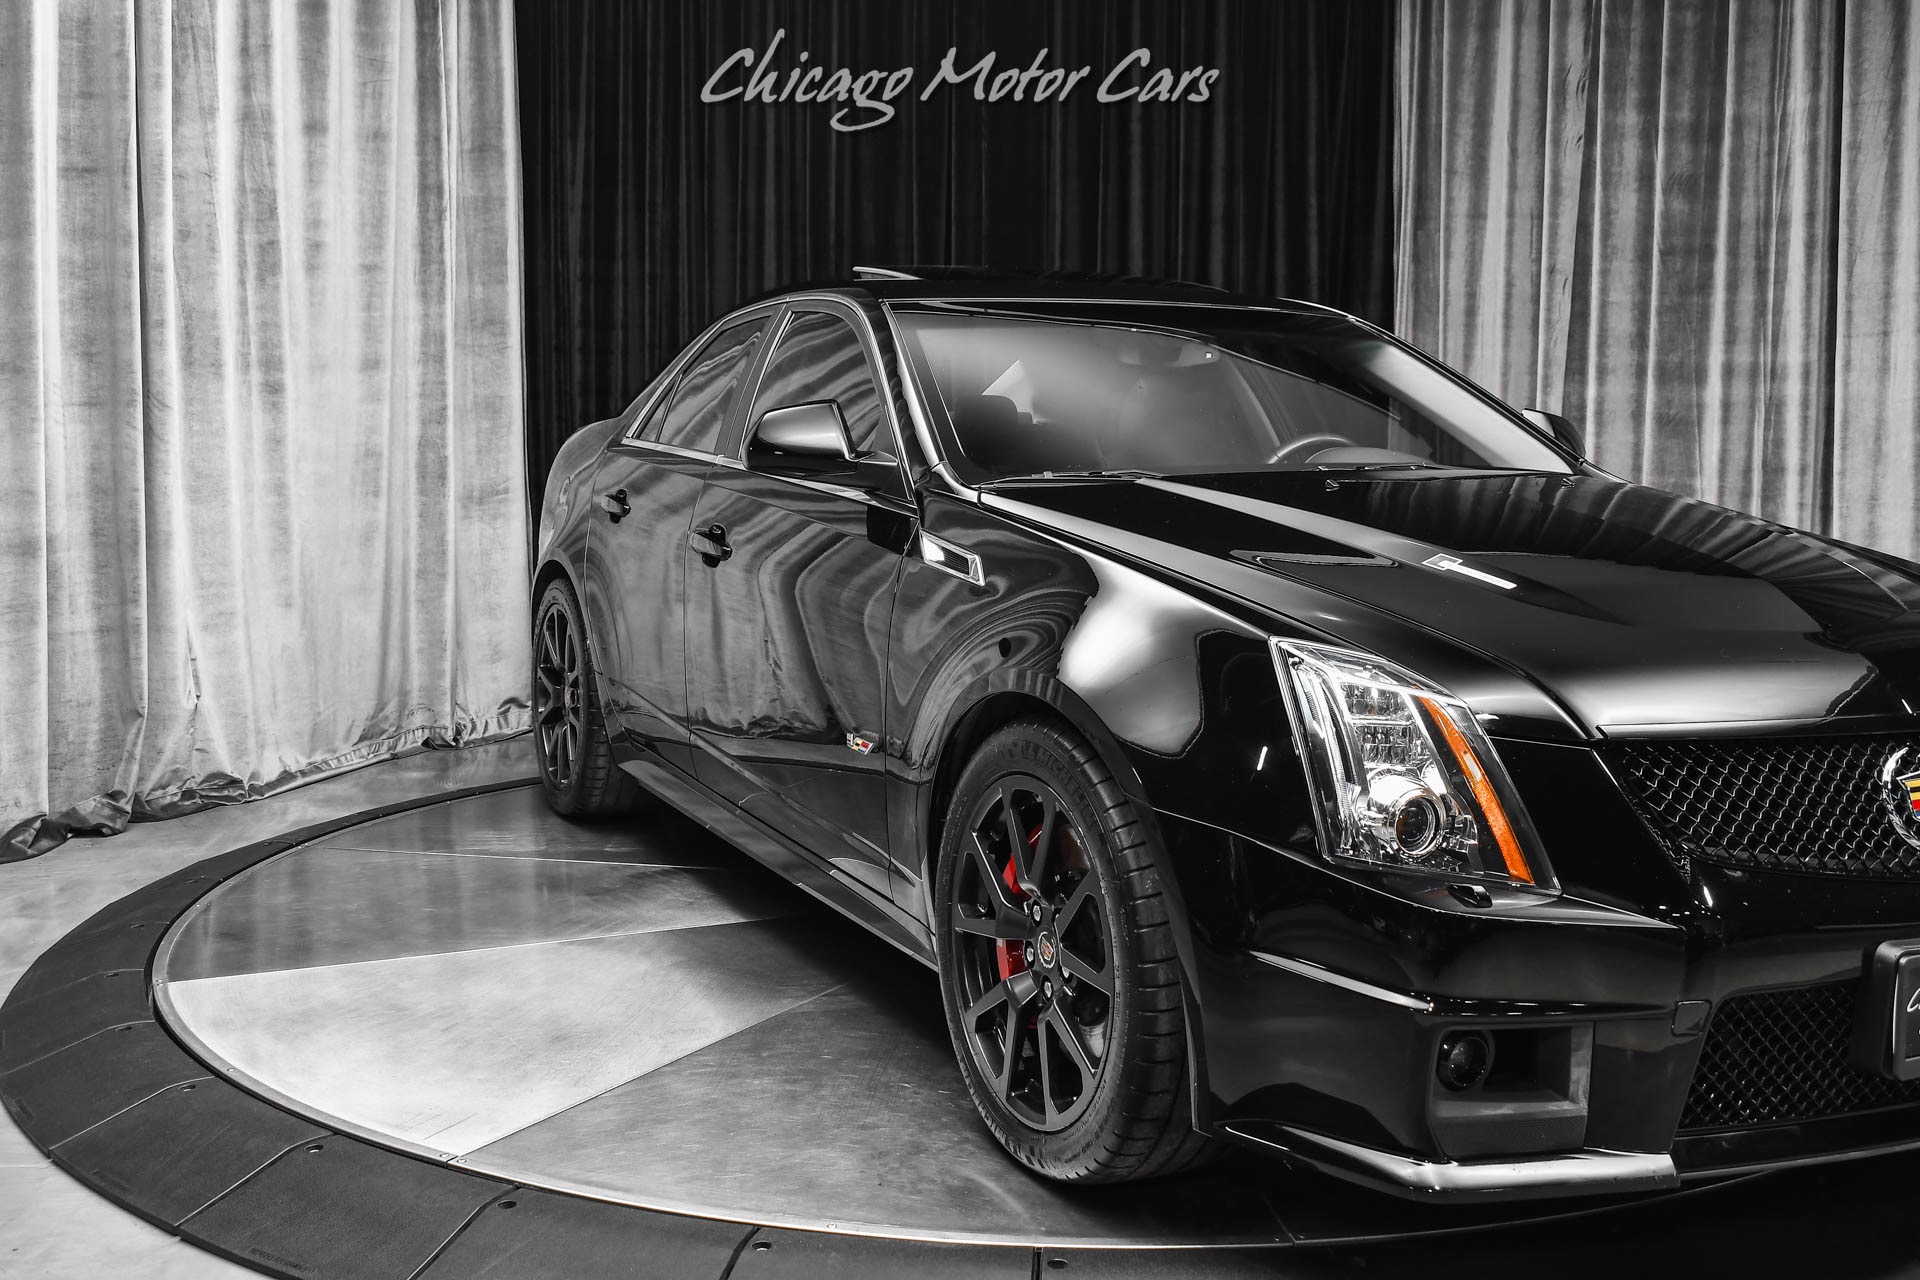 Used-2014-Cadillac-CTS-V-Low-Mileage-556HP-Ultraview-Sunroof